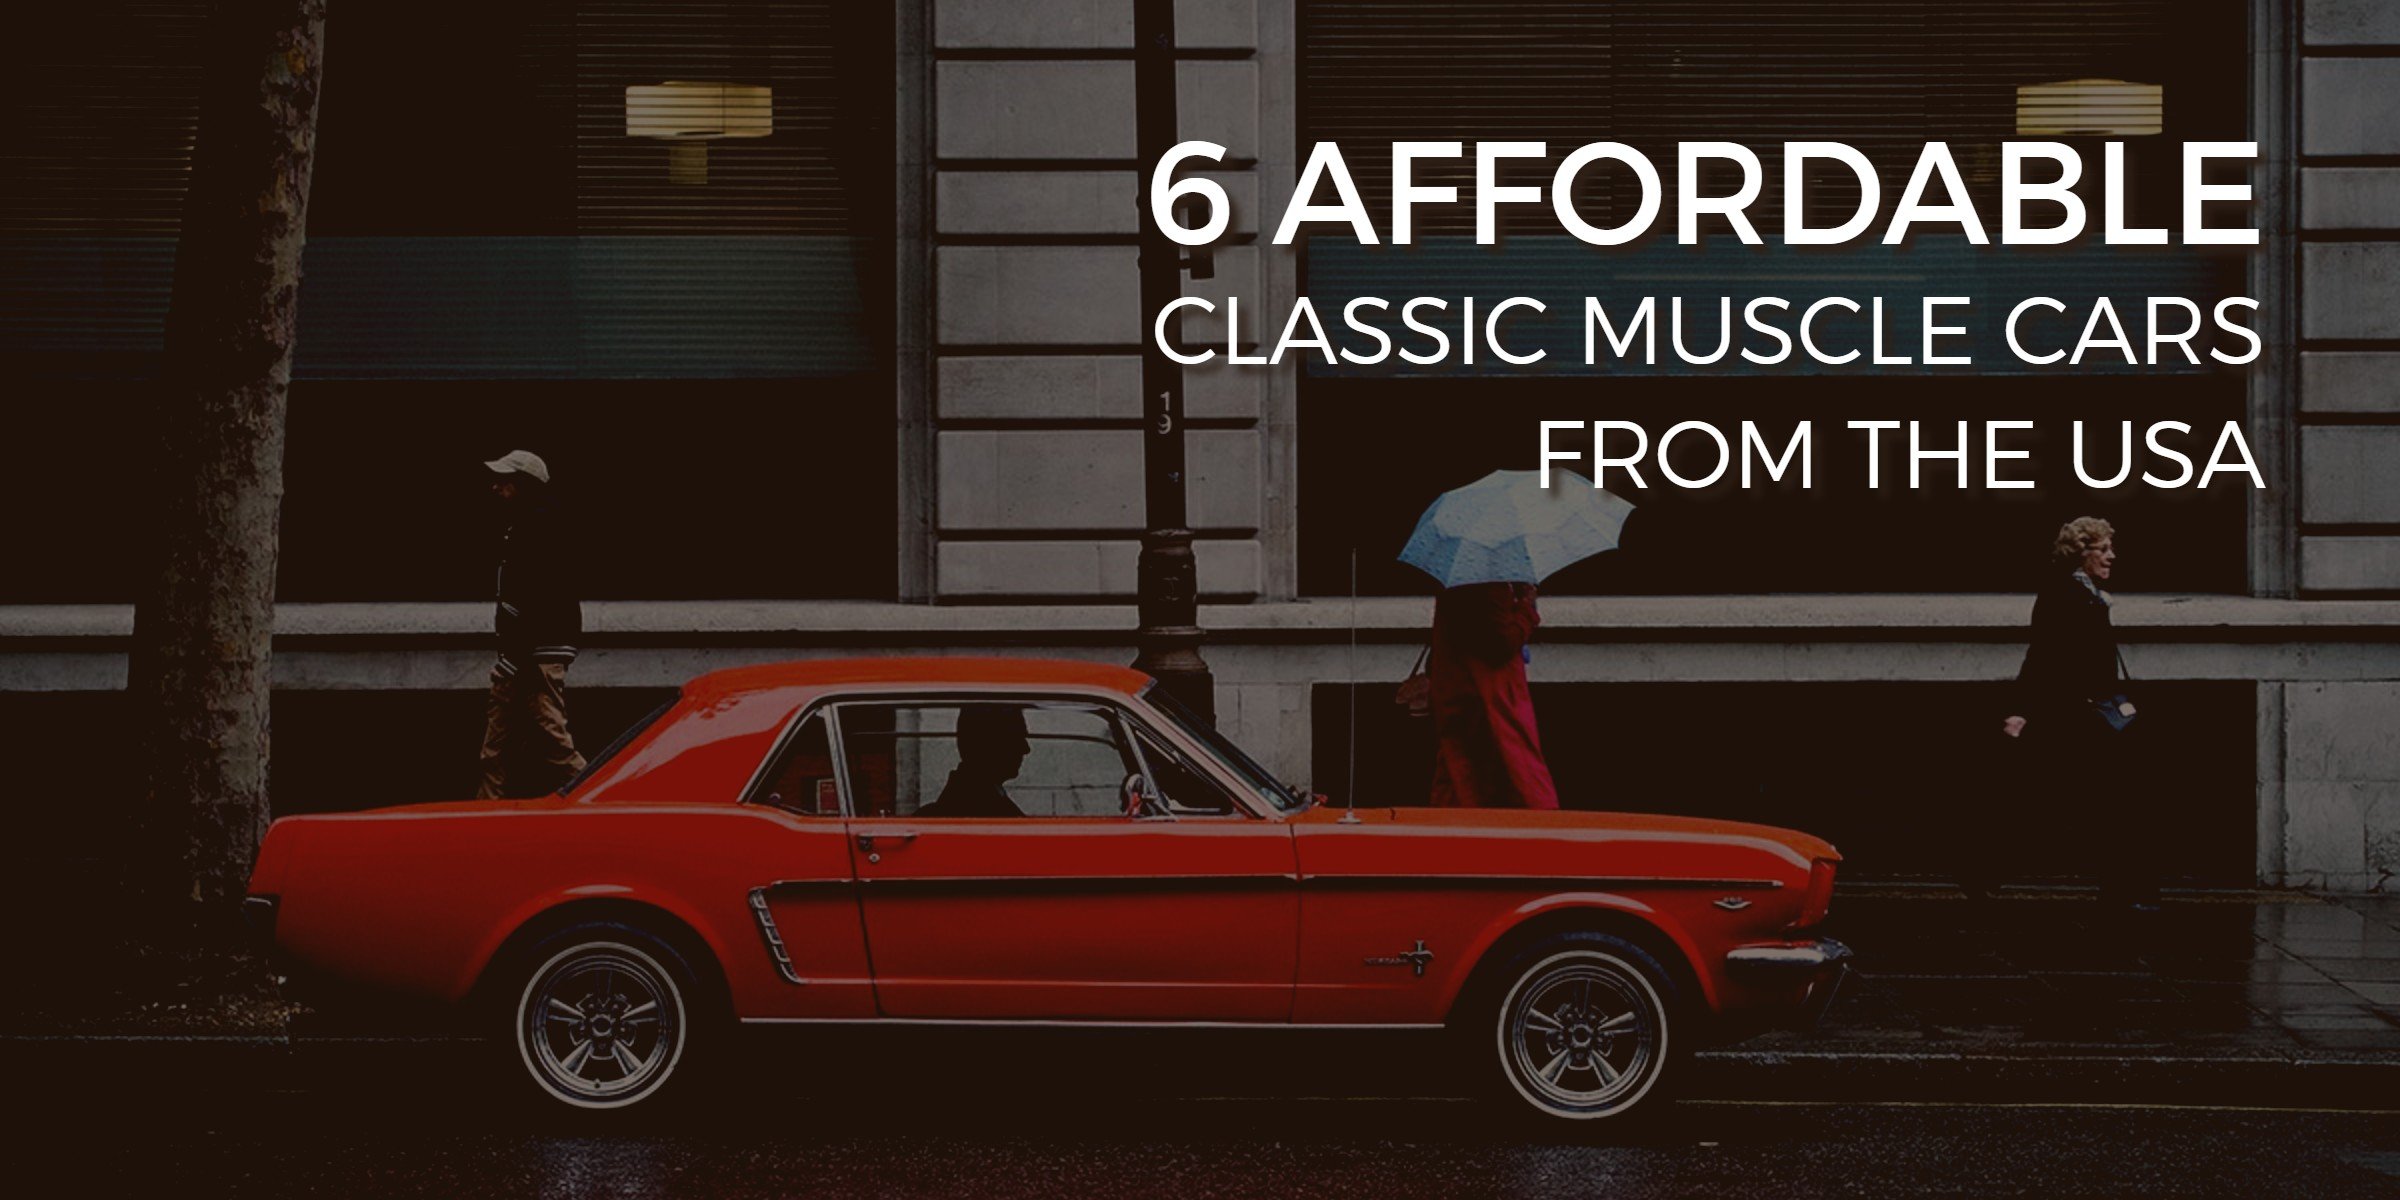 6 Affordable Classic Muscle Cars from the USA